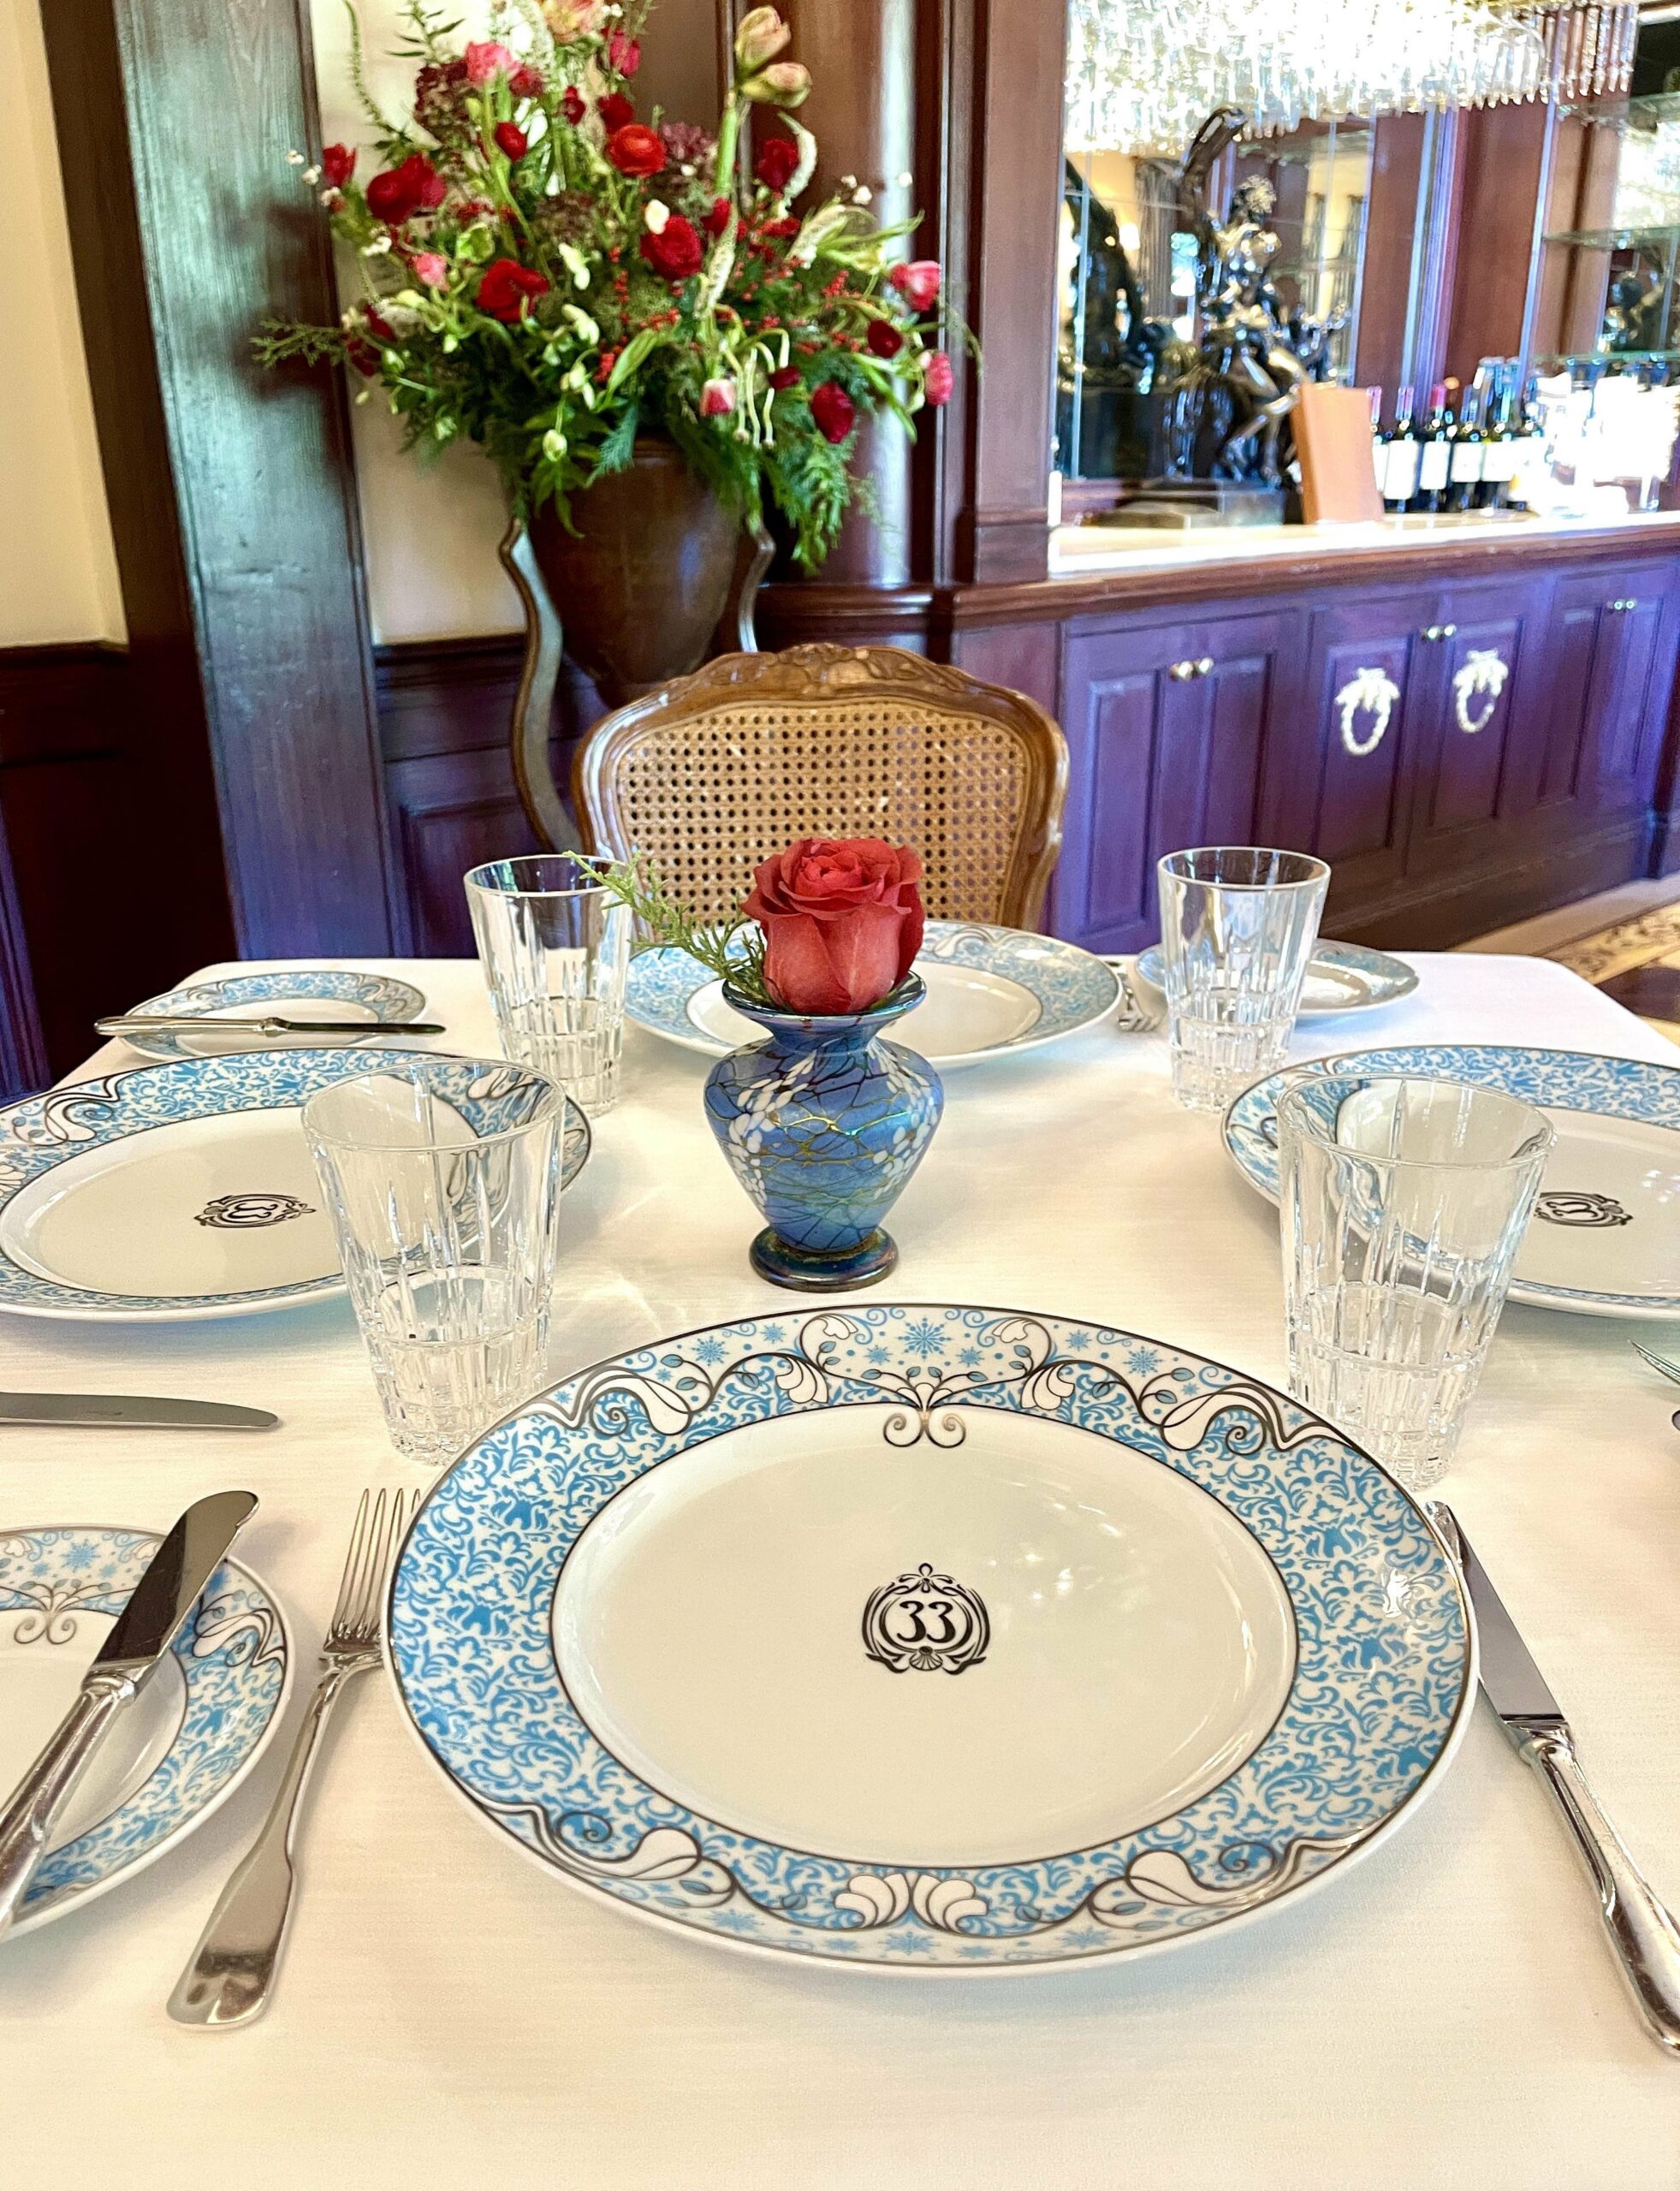 Place setting with rose in Club 33 dining room.